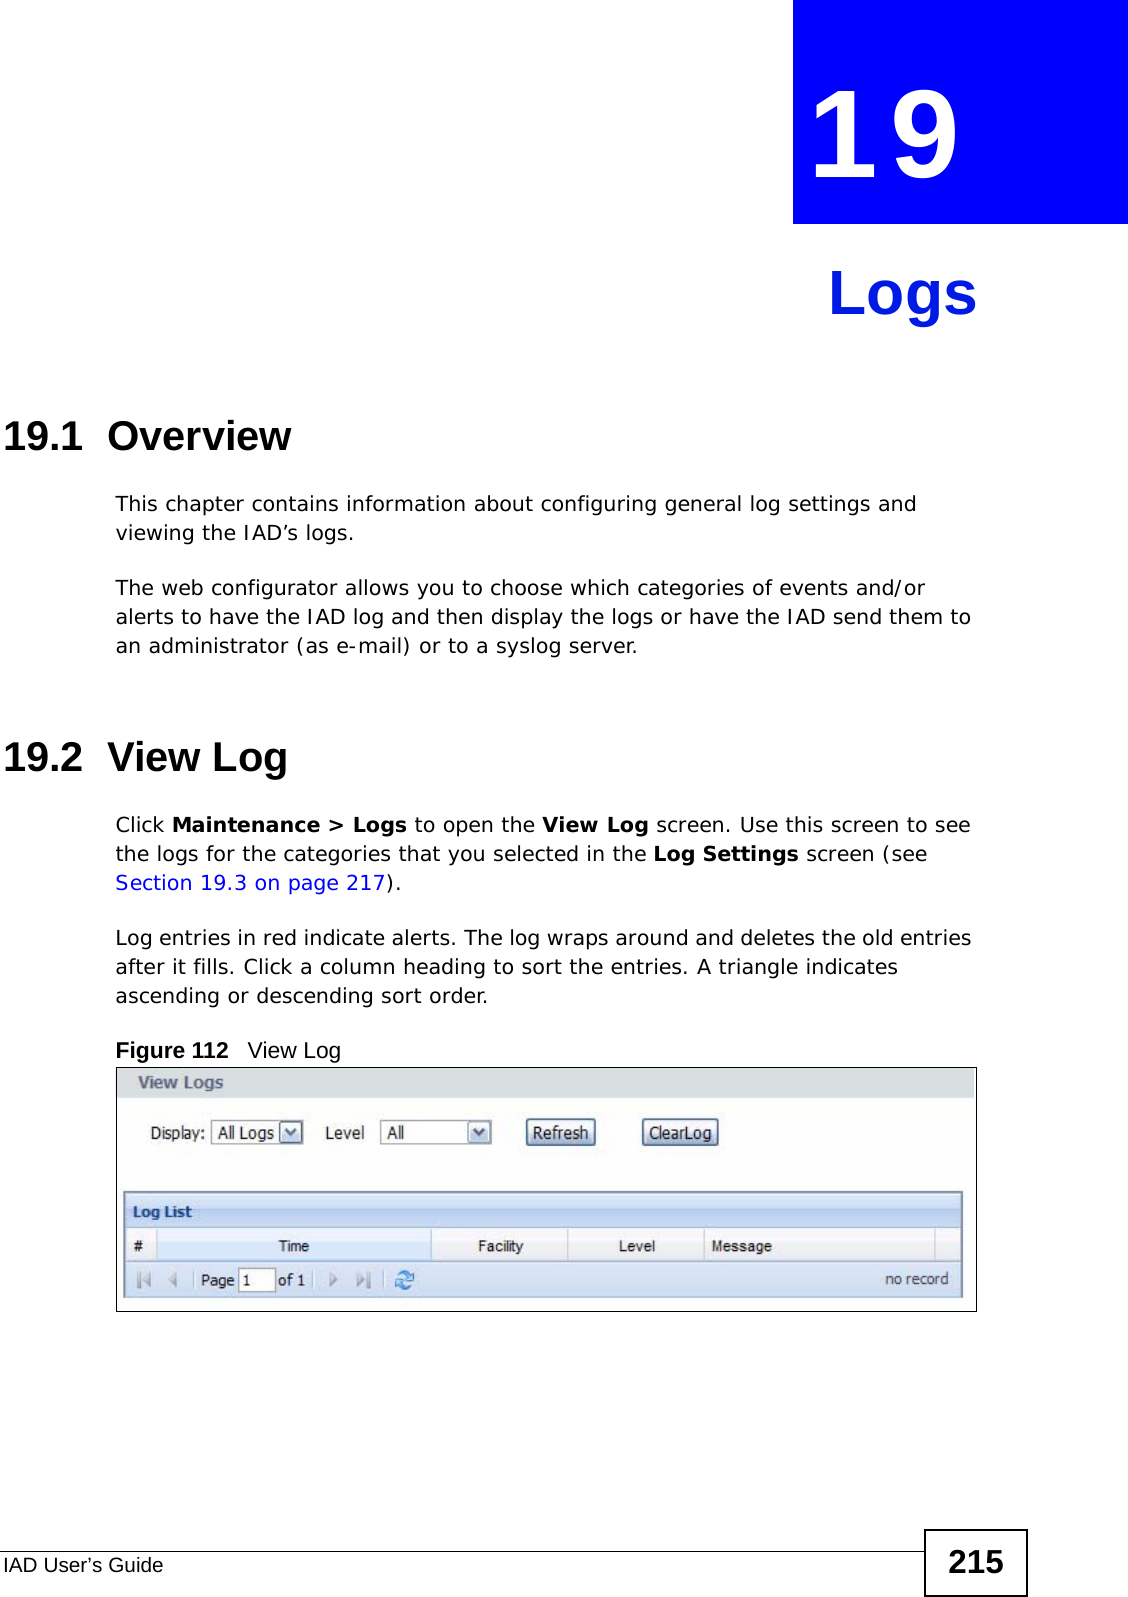 IAD User’s Guide 215CHAPTER  19 Logs19.1  OverviewThis chapter contains information about configuring general log settings and viewing the IAD’s logs. The web configurator allows you to choose which categories of events and/or alerts to have the IAD log and then display the logs or have the IAD send them to an administrator (as e-mail) or to a syslog server.19.2  View LogClick Maintenance &gt; Logs to open the View Log screen. Use this screen to see the logs for the categories that you selected in the Log Settings screen (see Section 19.3 on page 217). Log entries in red indicate alerts. The log wraps around and deletes the old entries after it fills. Click a column heading to sort the entries. A triangle indicates ascending or descending sort order. Figure 112   View Log